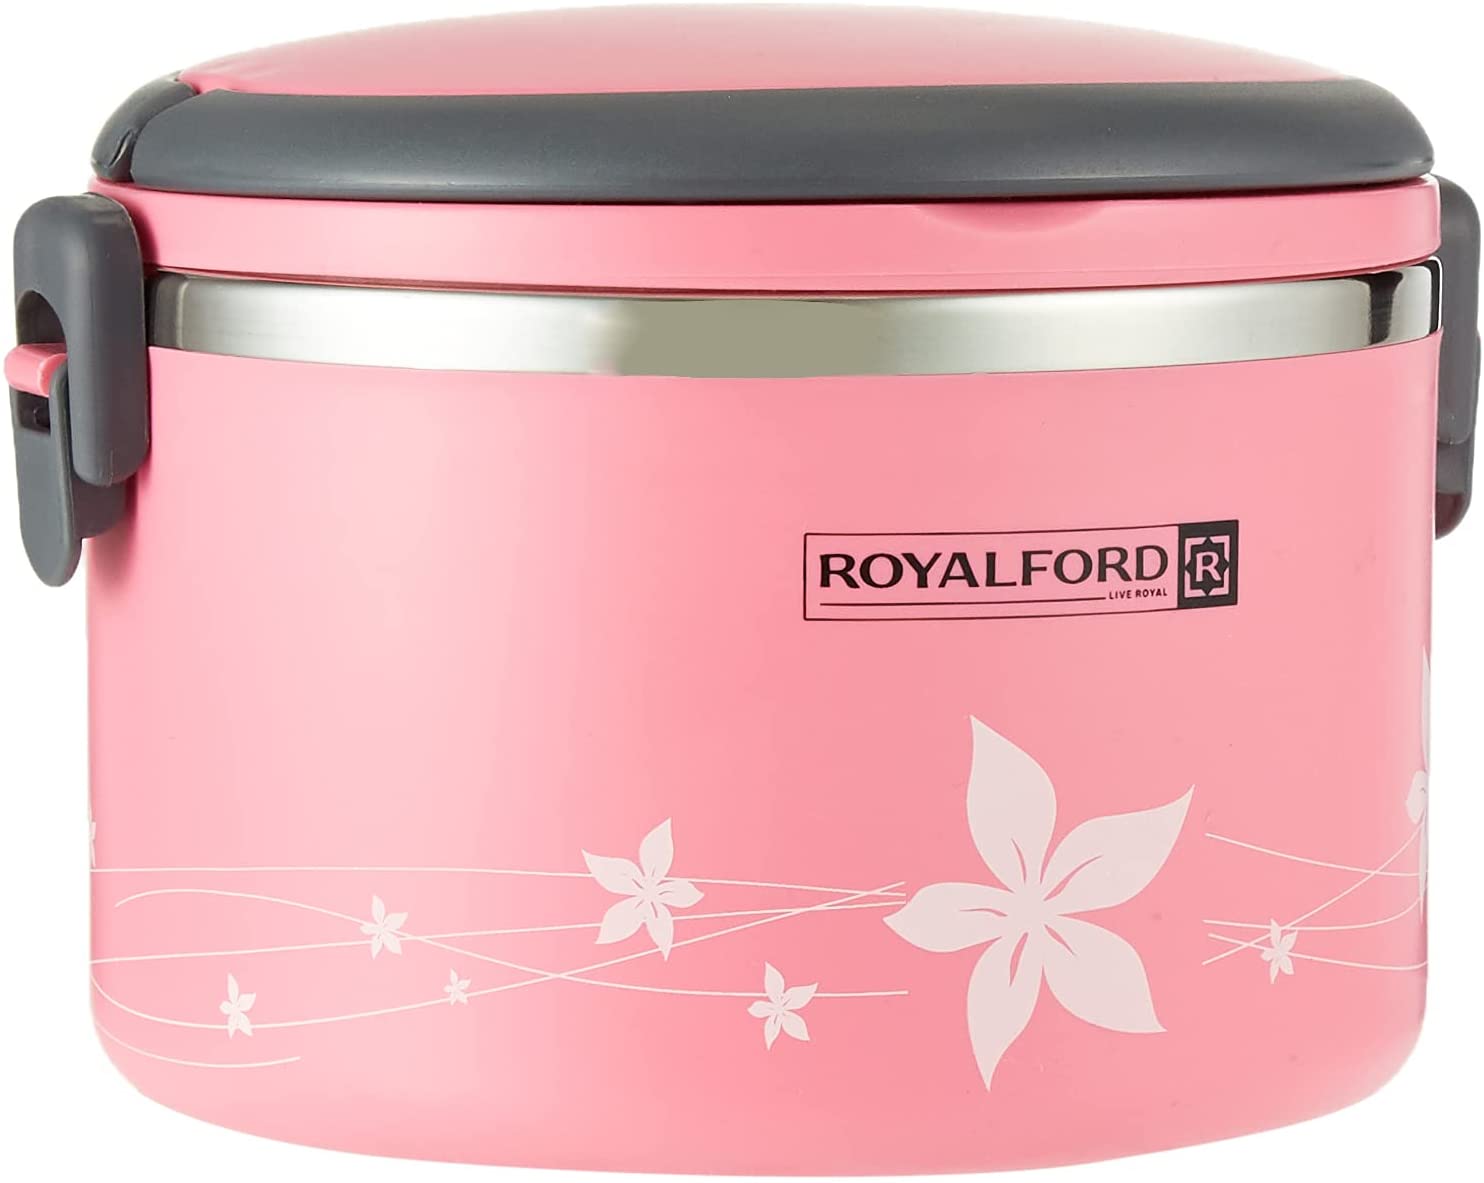 Royalford RF5651 Stainless Steel Lunch Box 1 L